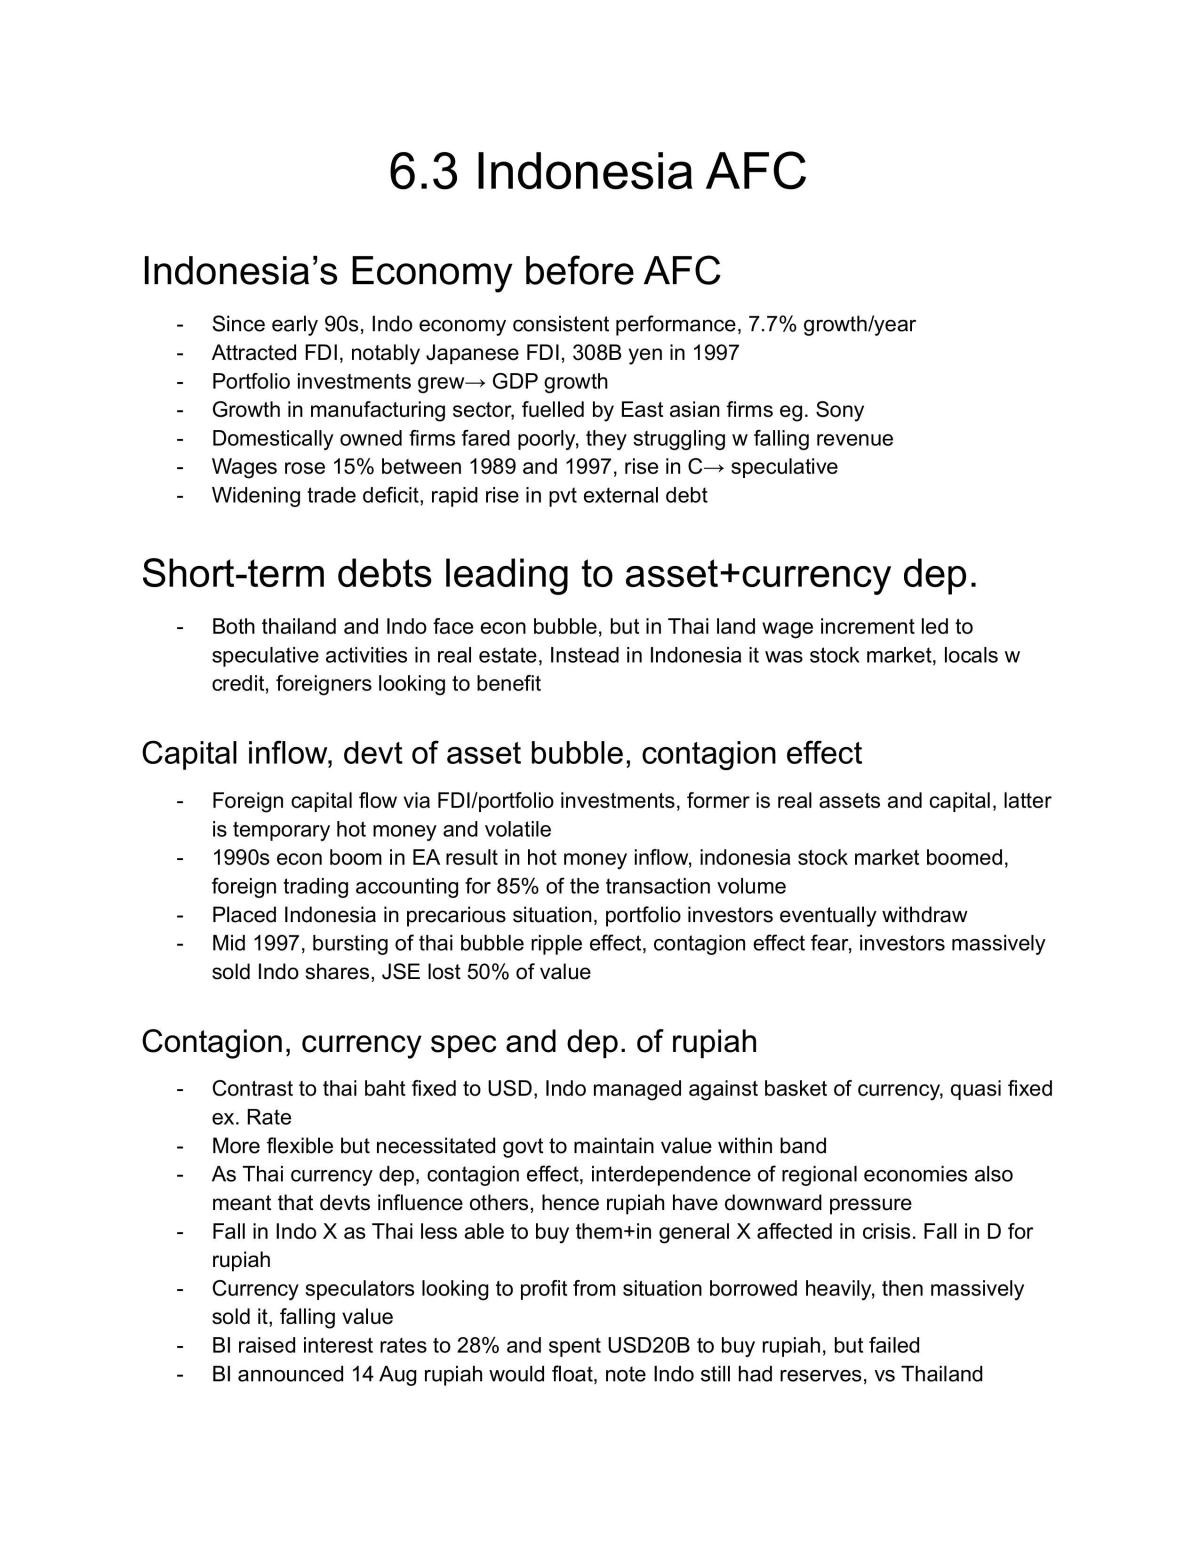 Asian Financial Crisis in Indonesia - Page 1